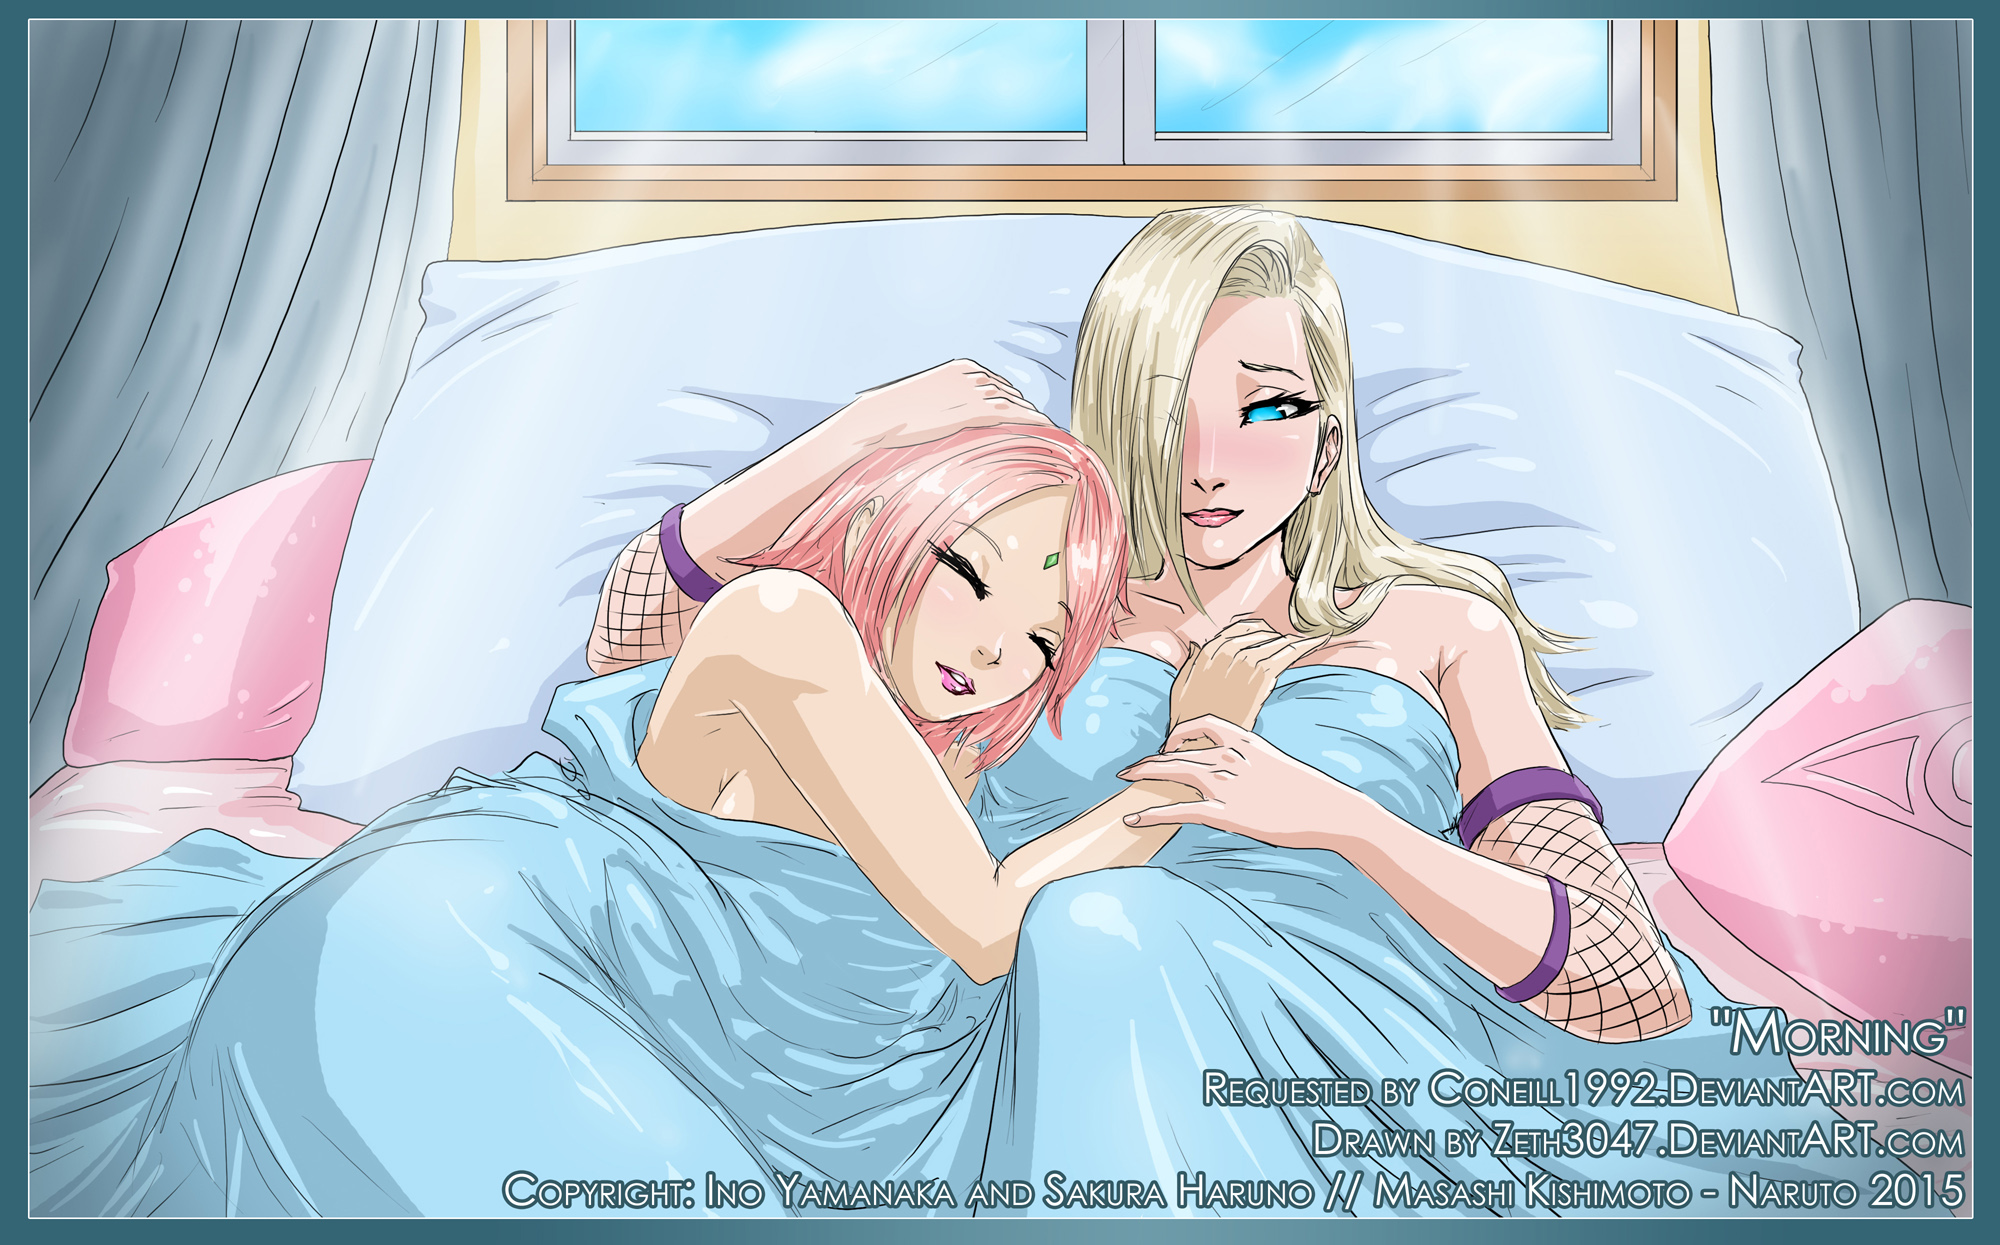 request___morning_by_zeth3047-d9m5hao